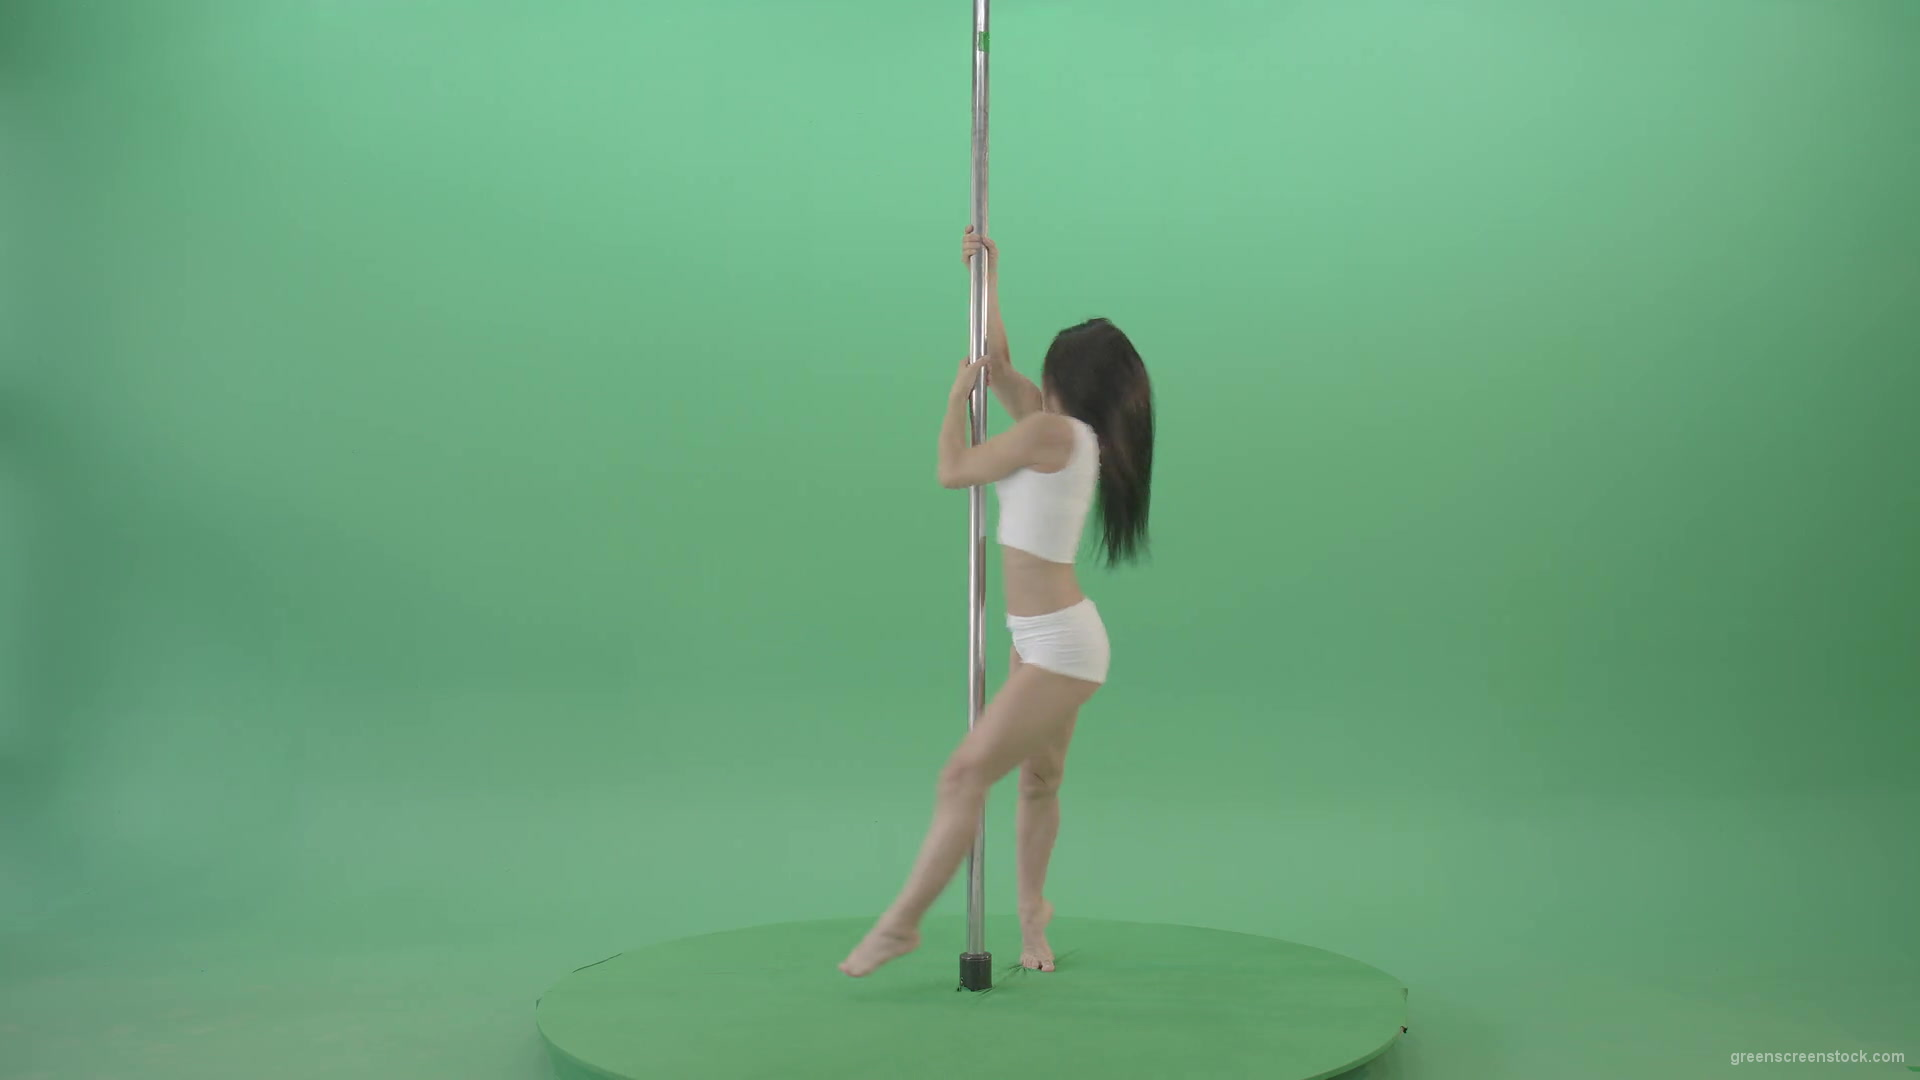 Small-Girl-make-spin-pole-fly-isolated-on-green-screen-4K-Video-Footage--1920_006 Green Screen Stock